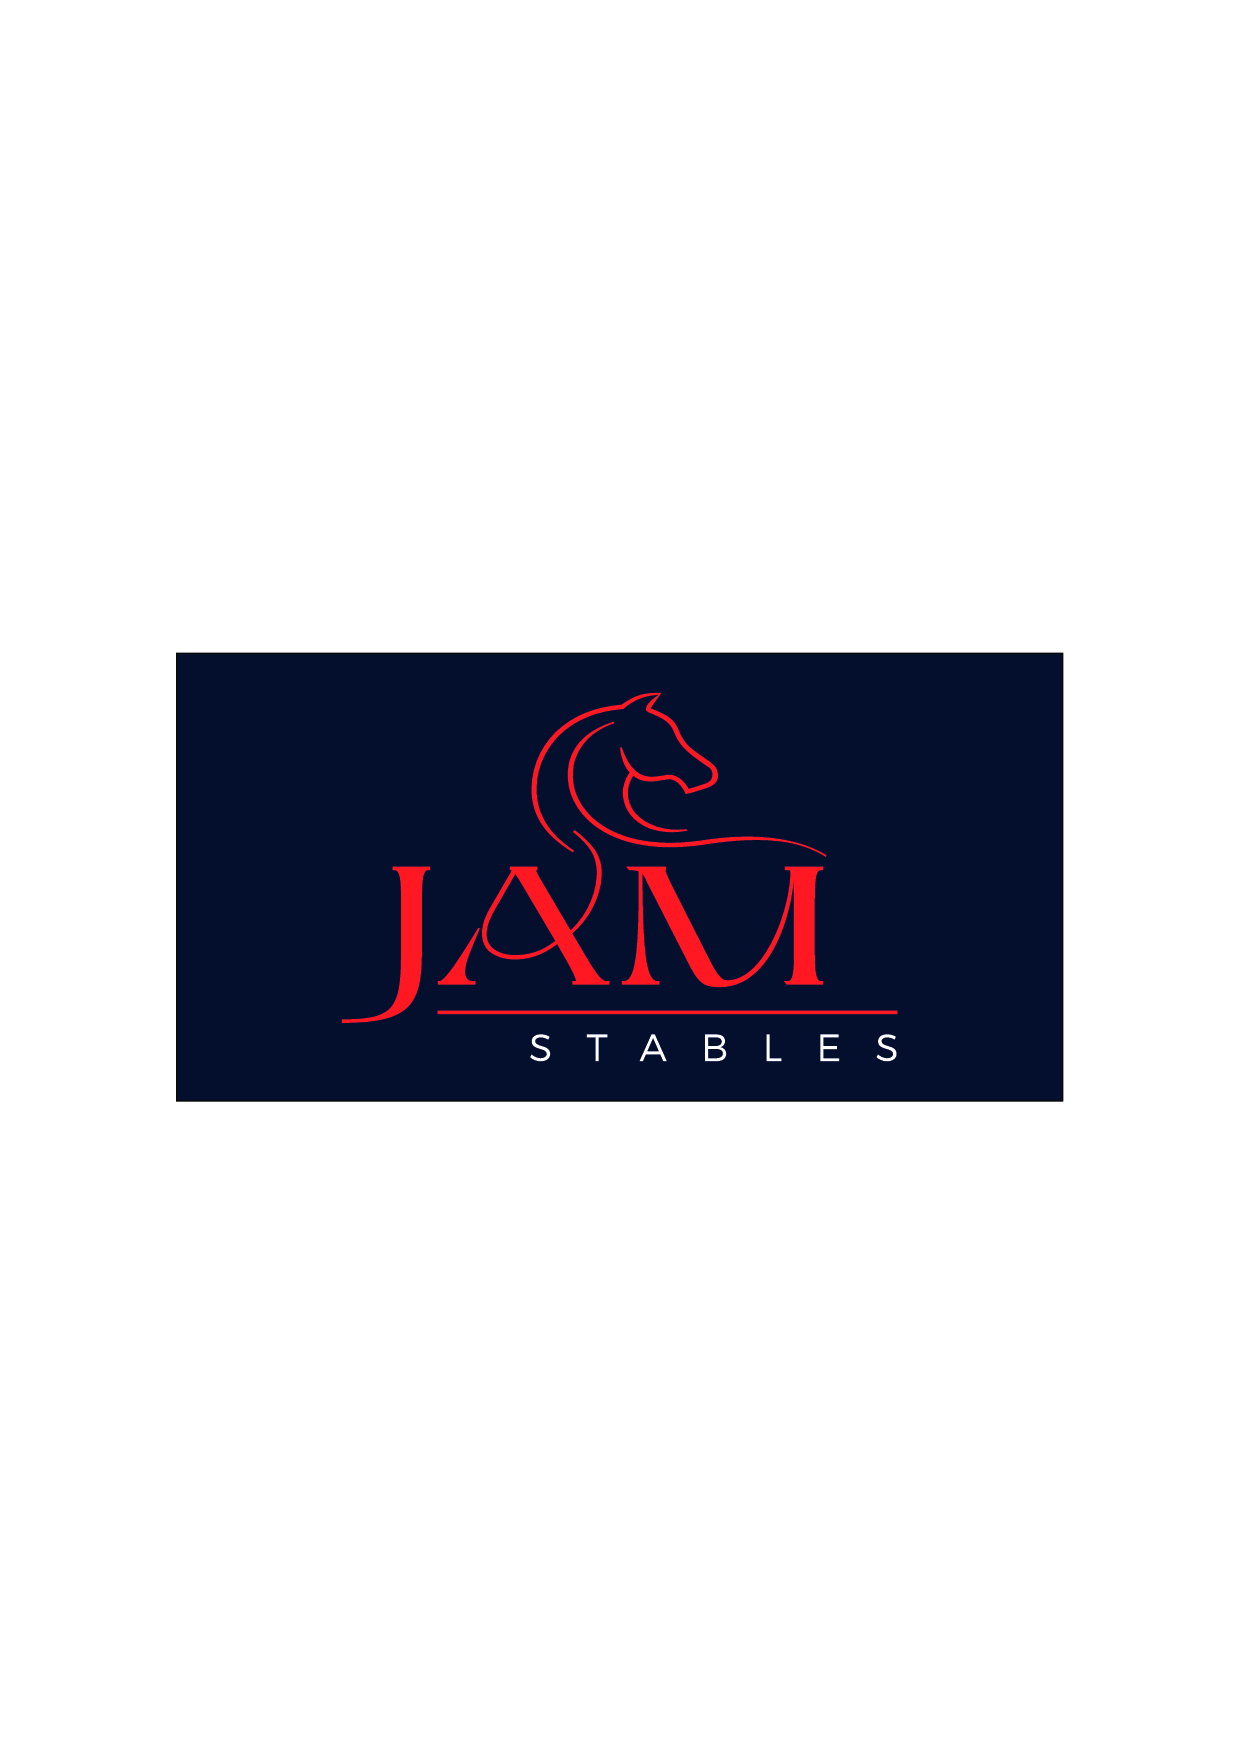 JAM Stables